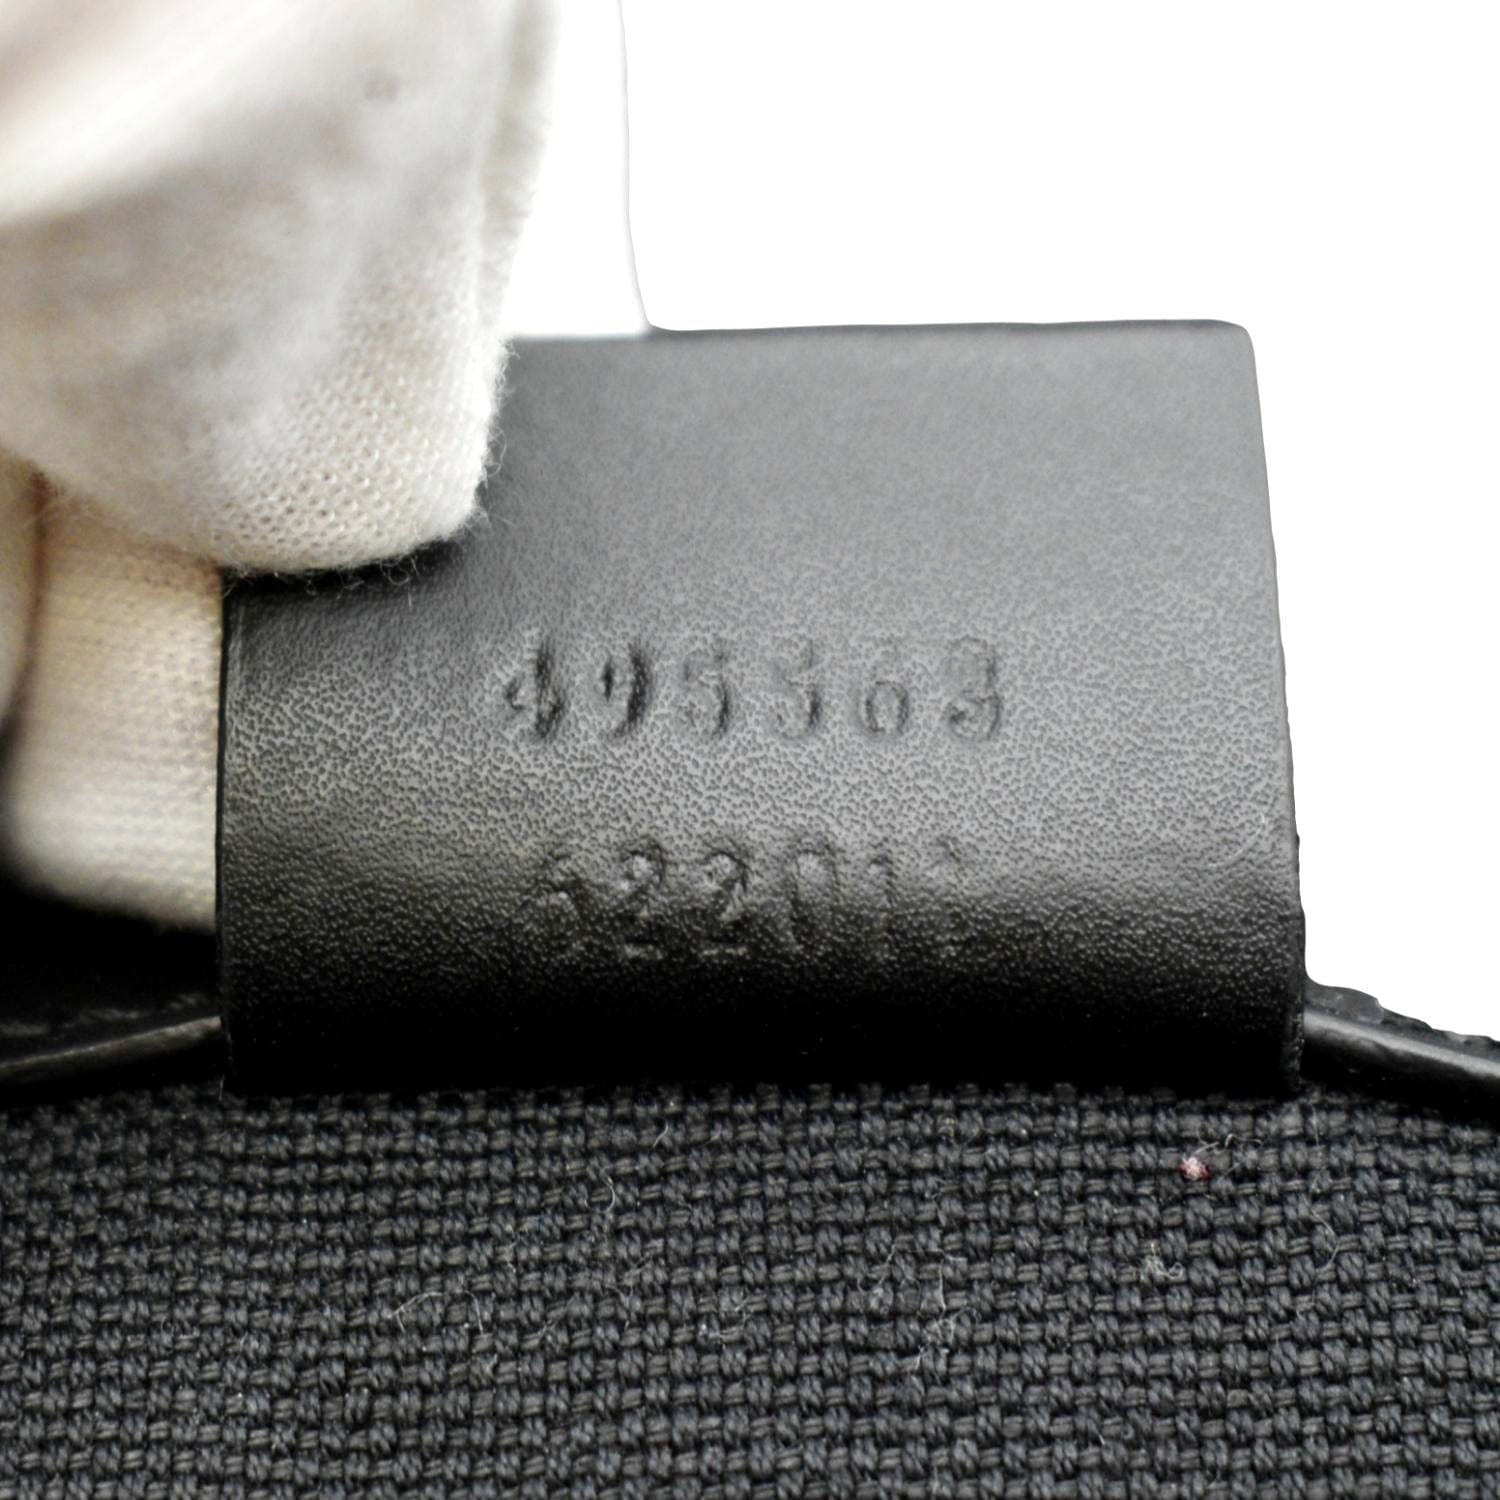 Gucci GG Supreme Canvas & Leather Backpack in Black